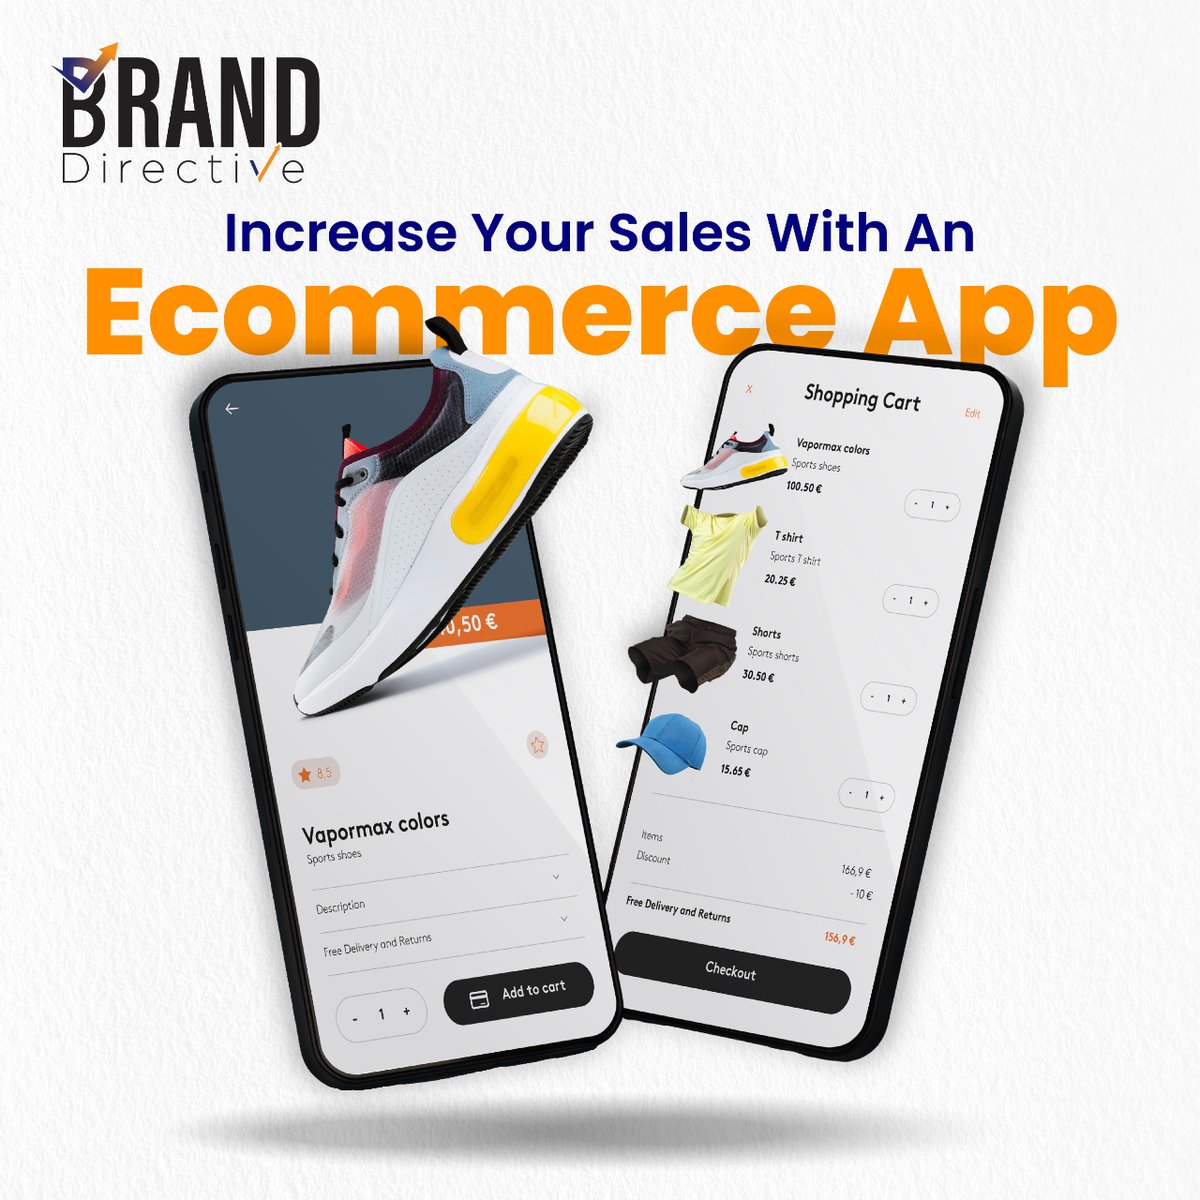 Skyrocket your sales and share targeted notification to your app users for regular engagement with our E-commerce strategy.
Grow your Ecommerce business with expert like us - branddirective.in/contact/

#ecommercebusiness #digitalgoldrush #ecommerceapplication #appdevelopment